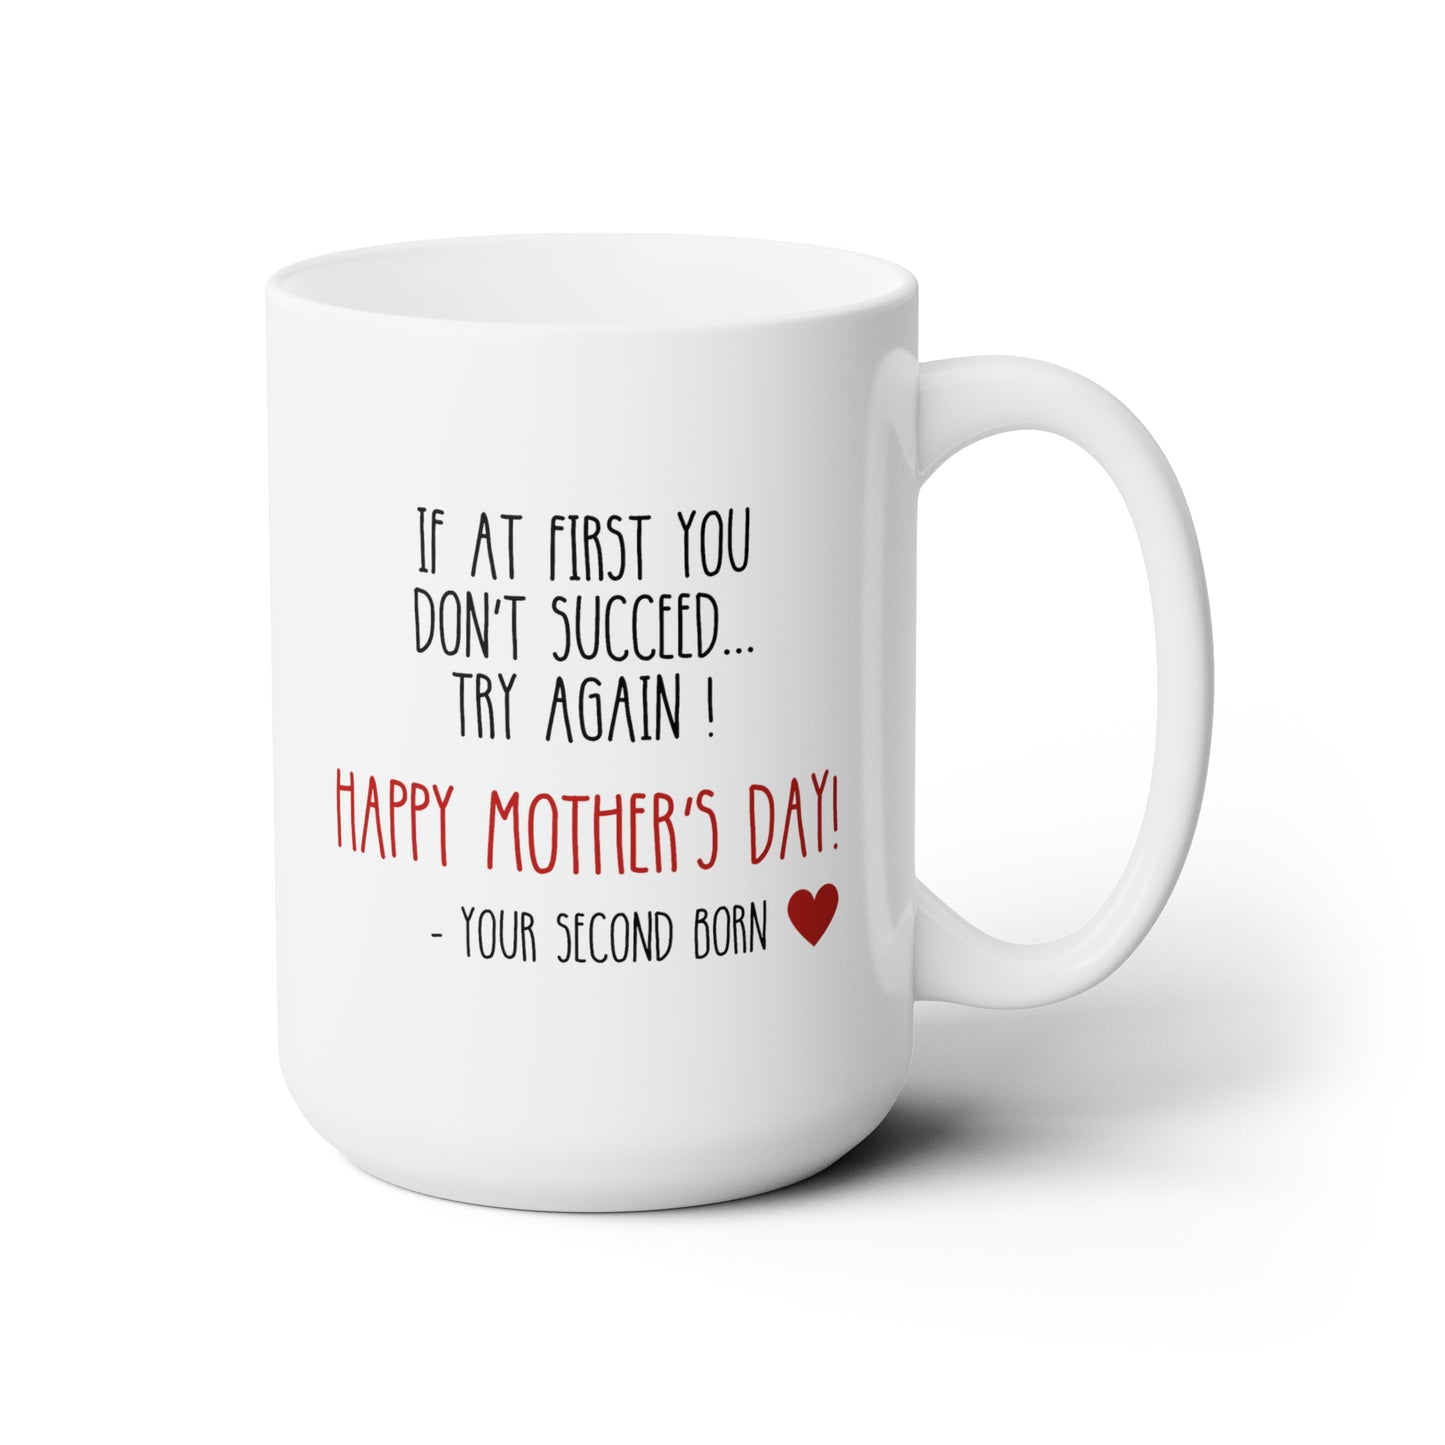 If At First You Don't Succeed Try Again 15oz white funny large coffee mug gift for mother's day second born child sibling mom her waveywares wavey wares wavywares wavy wares